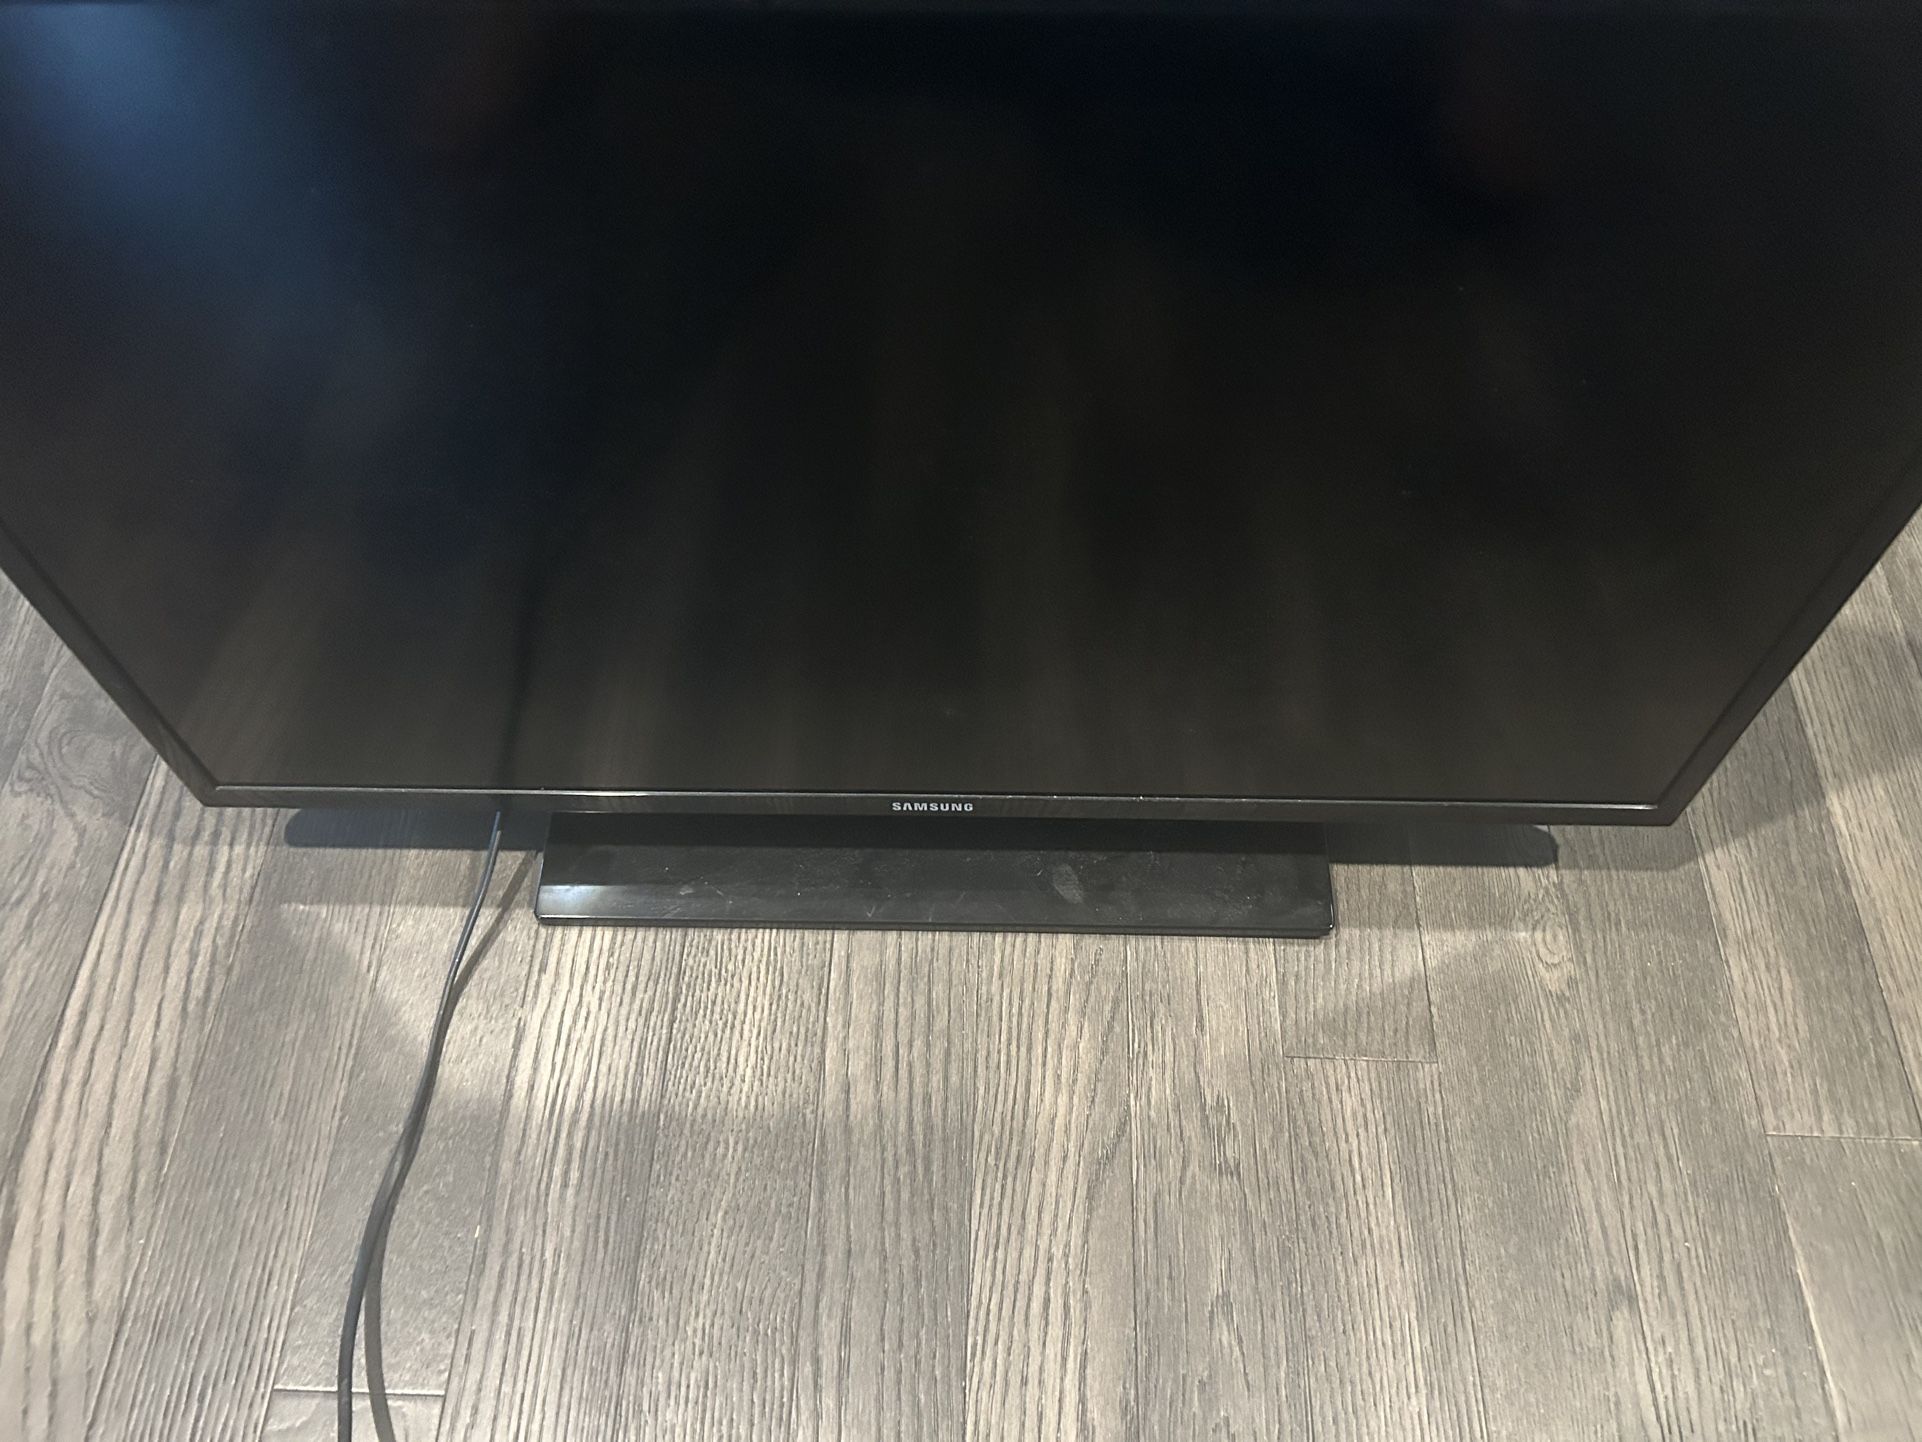 Samsung Tv 32 Inches 